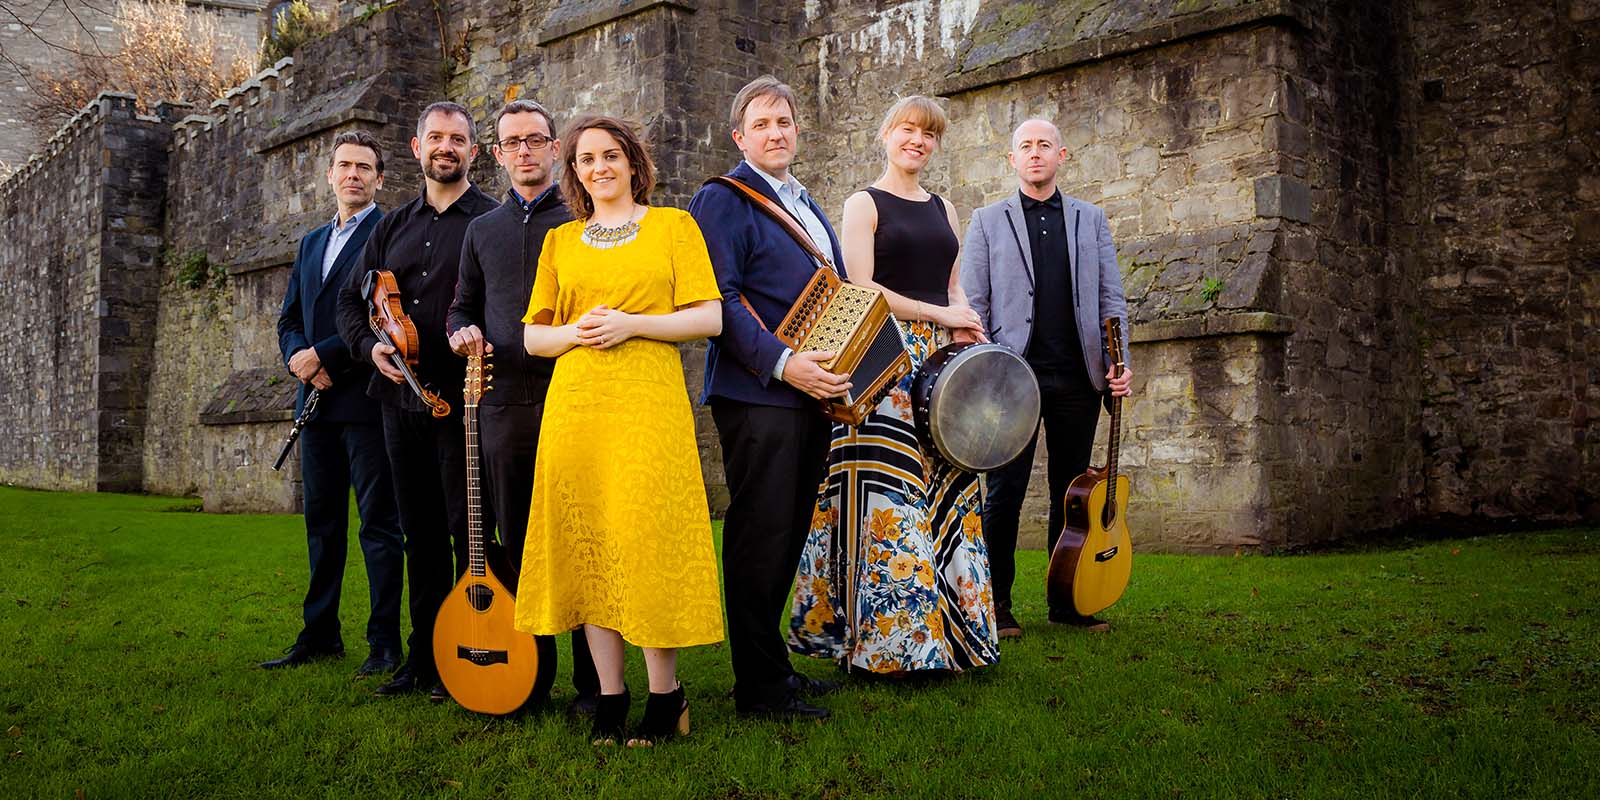 Danú posing with their instruments on green grass with a stone building behind them.